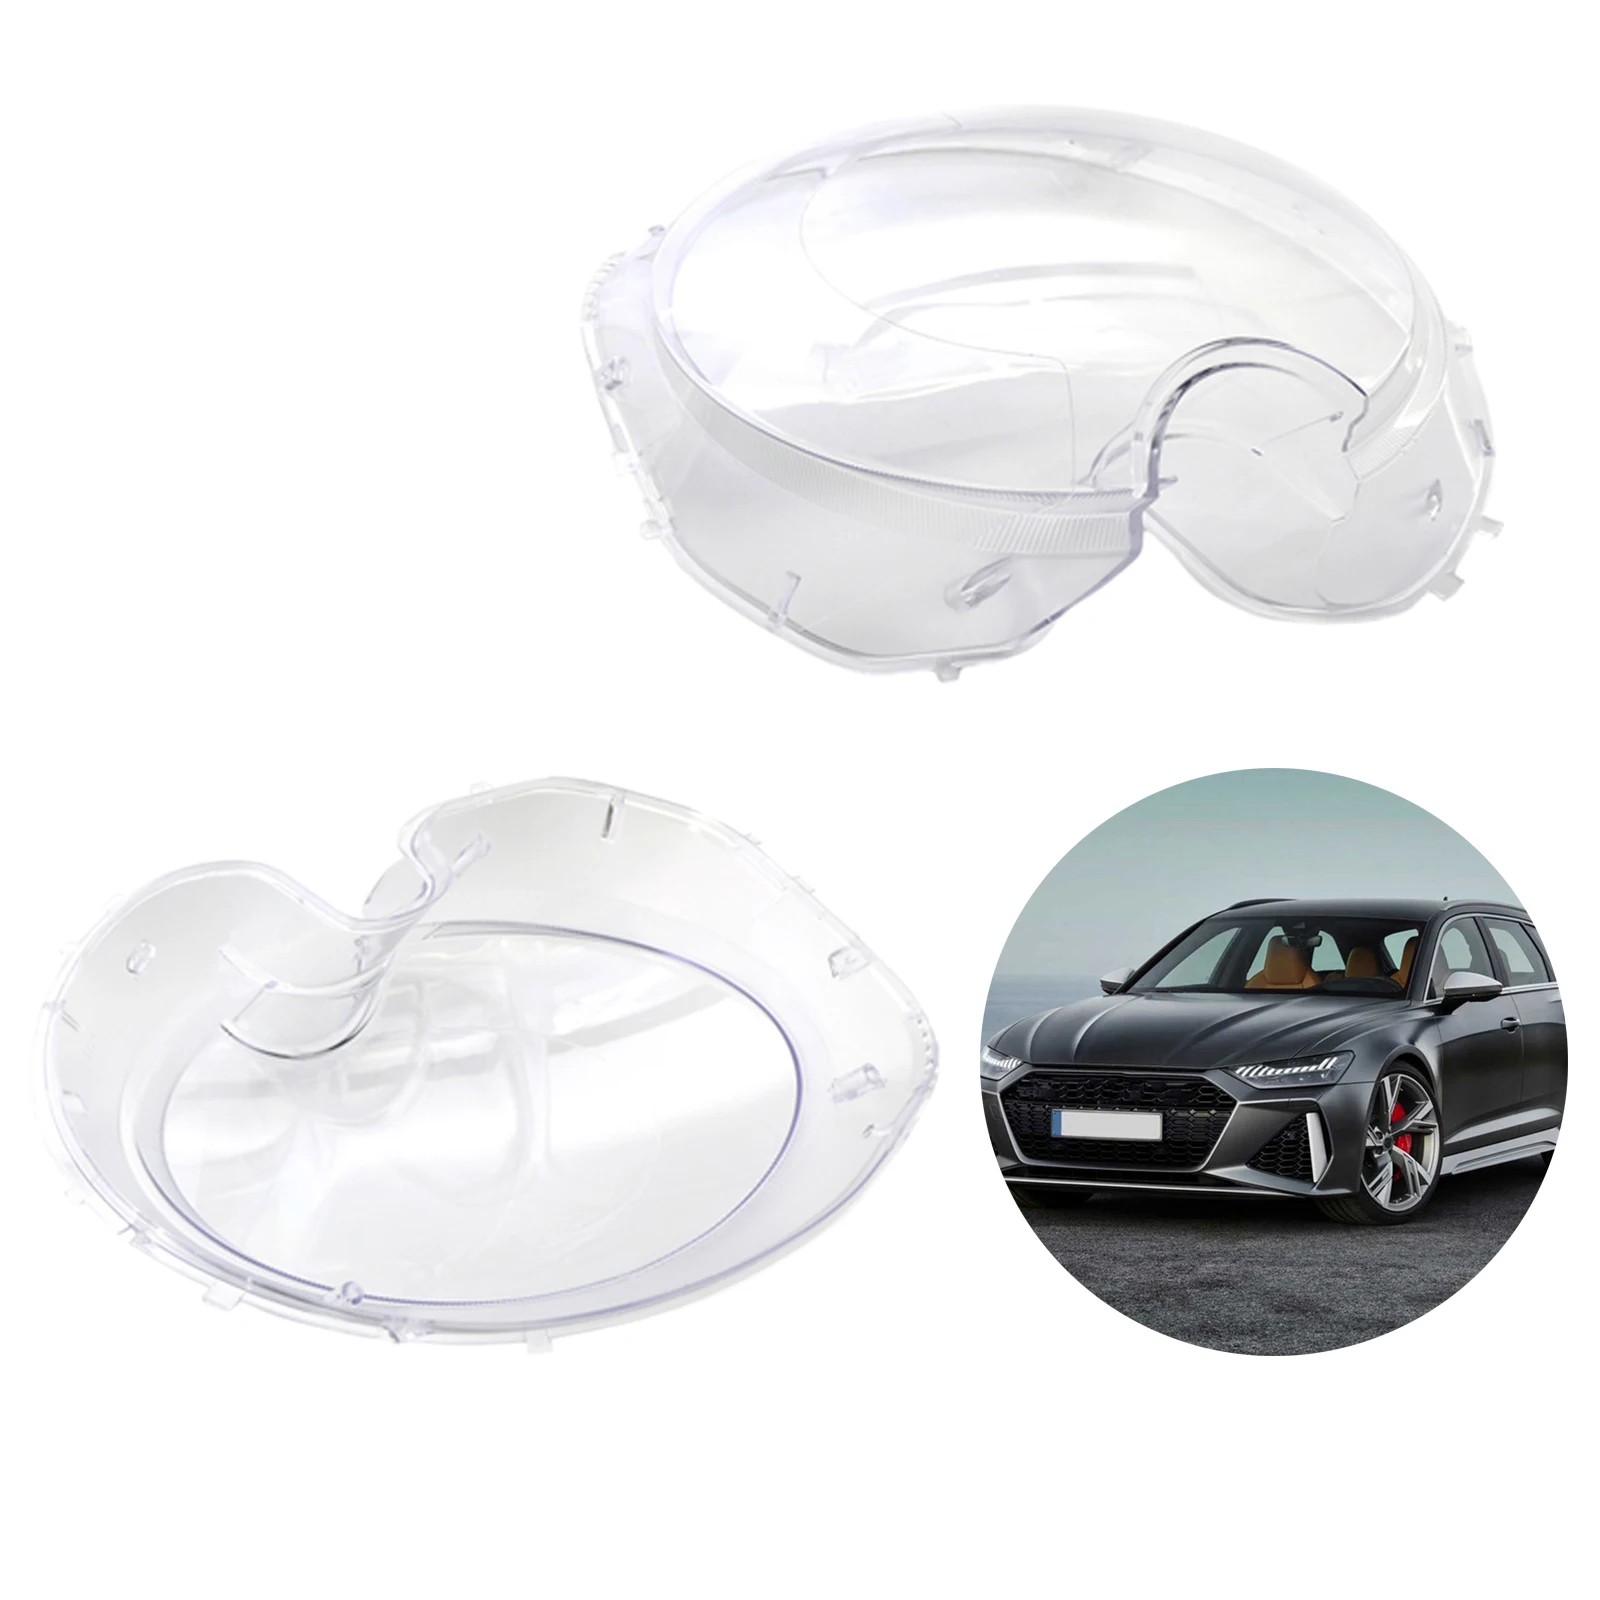 Clear Headlamp Lens Cover Lampshade for Mini R56 Cooper Hatchback 07-13 63127270023 63127270024 Replacement Parts Accessories